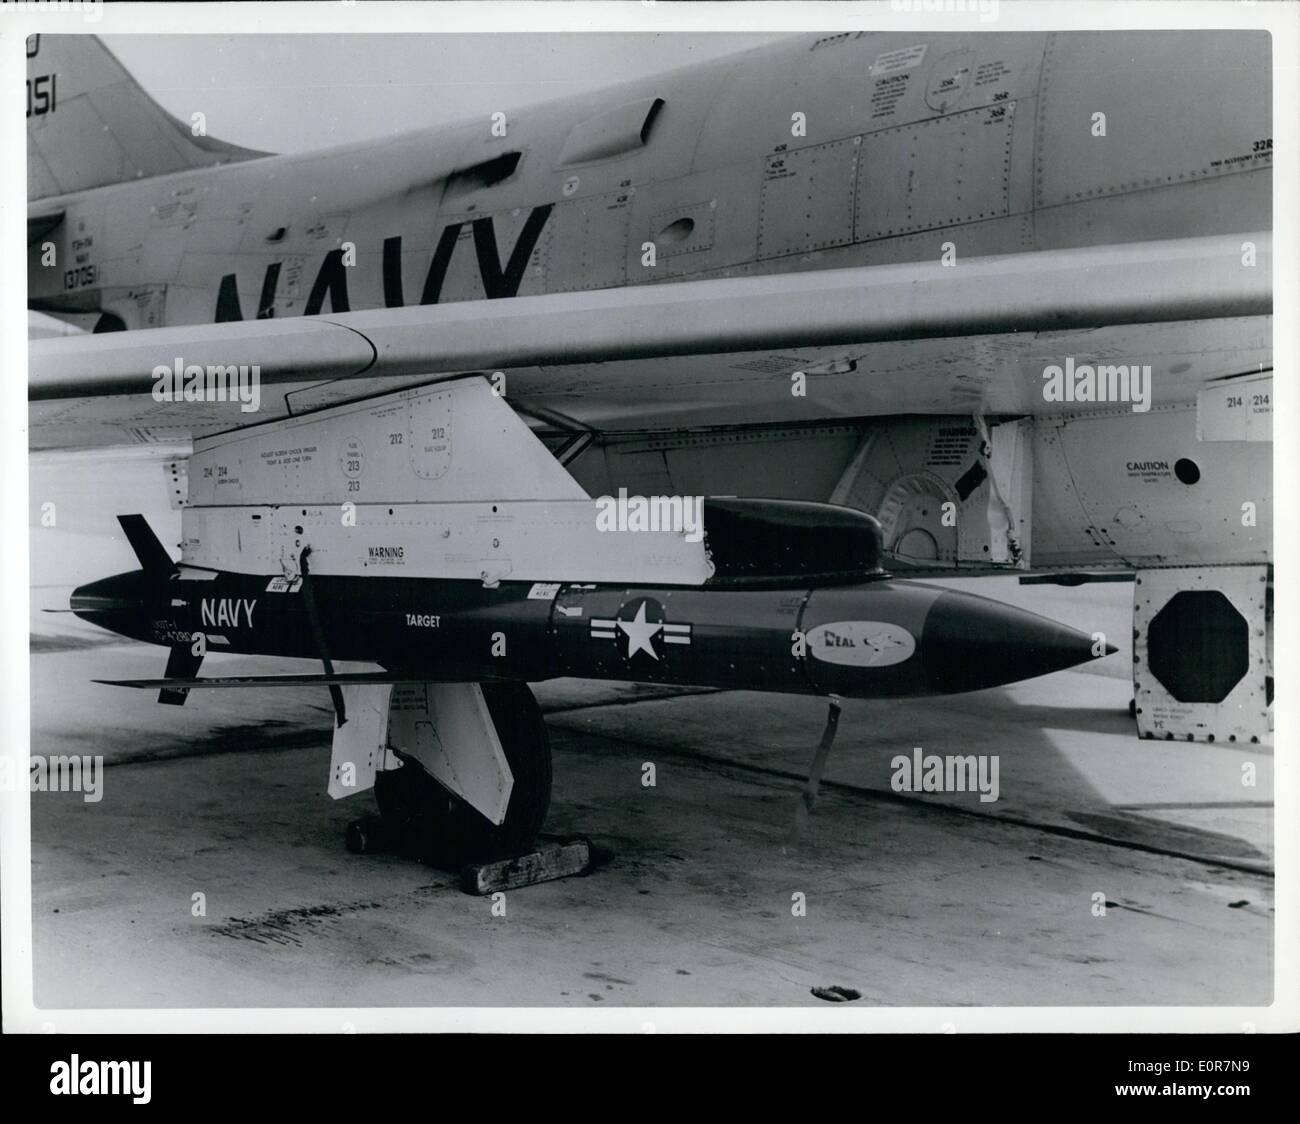 May 06, 1958 - 6-5-58 The XKDT-1. A Navy Air-to-missile target is shown on the wing of a F3H jet fighter. Powered by a long duration rocket motor, the expendable target is used in training jet fighter pilots in air-to-air combat. The XKDT-1 is manufactured by Temco Aircraft Corporation of Dallas, Texas. Stock Photo